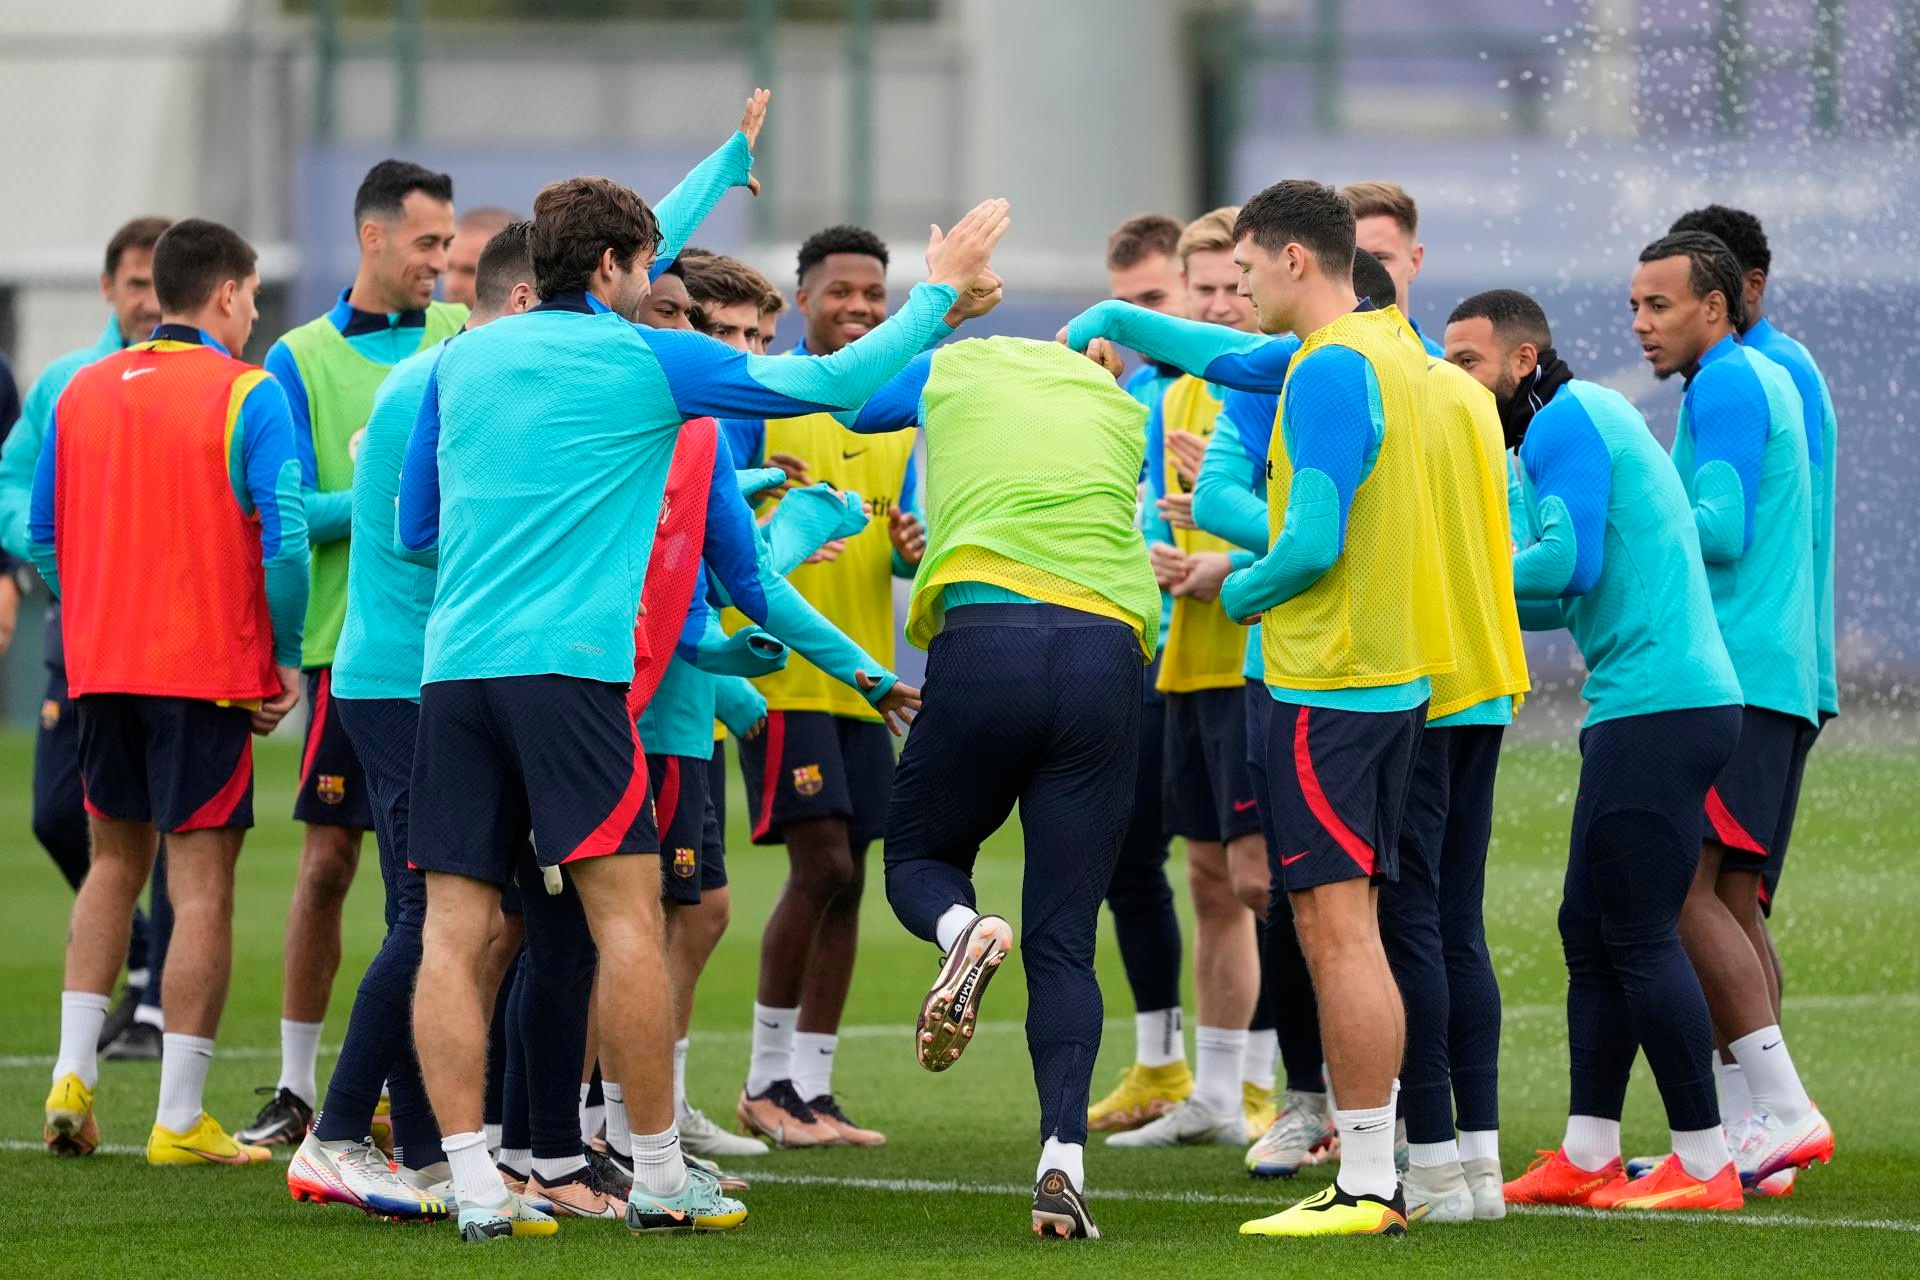 Academy players filled Barcelona training session